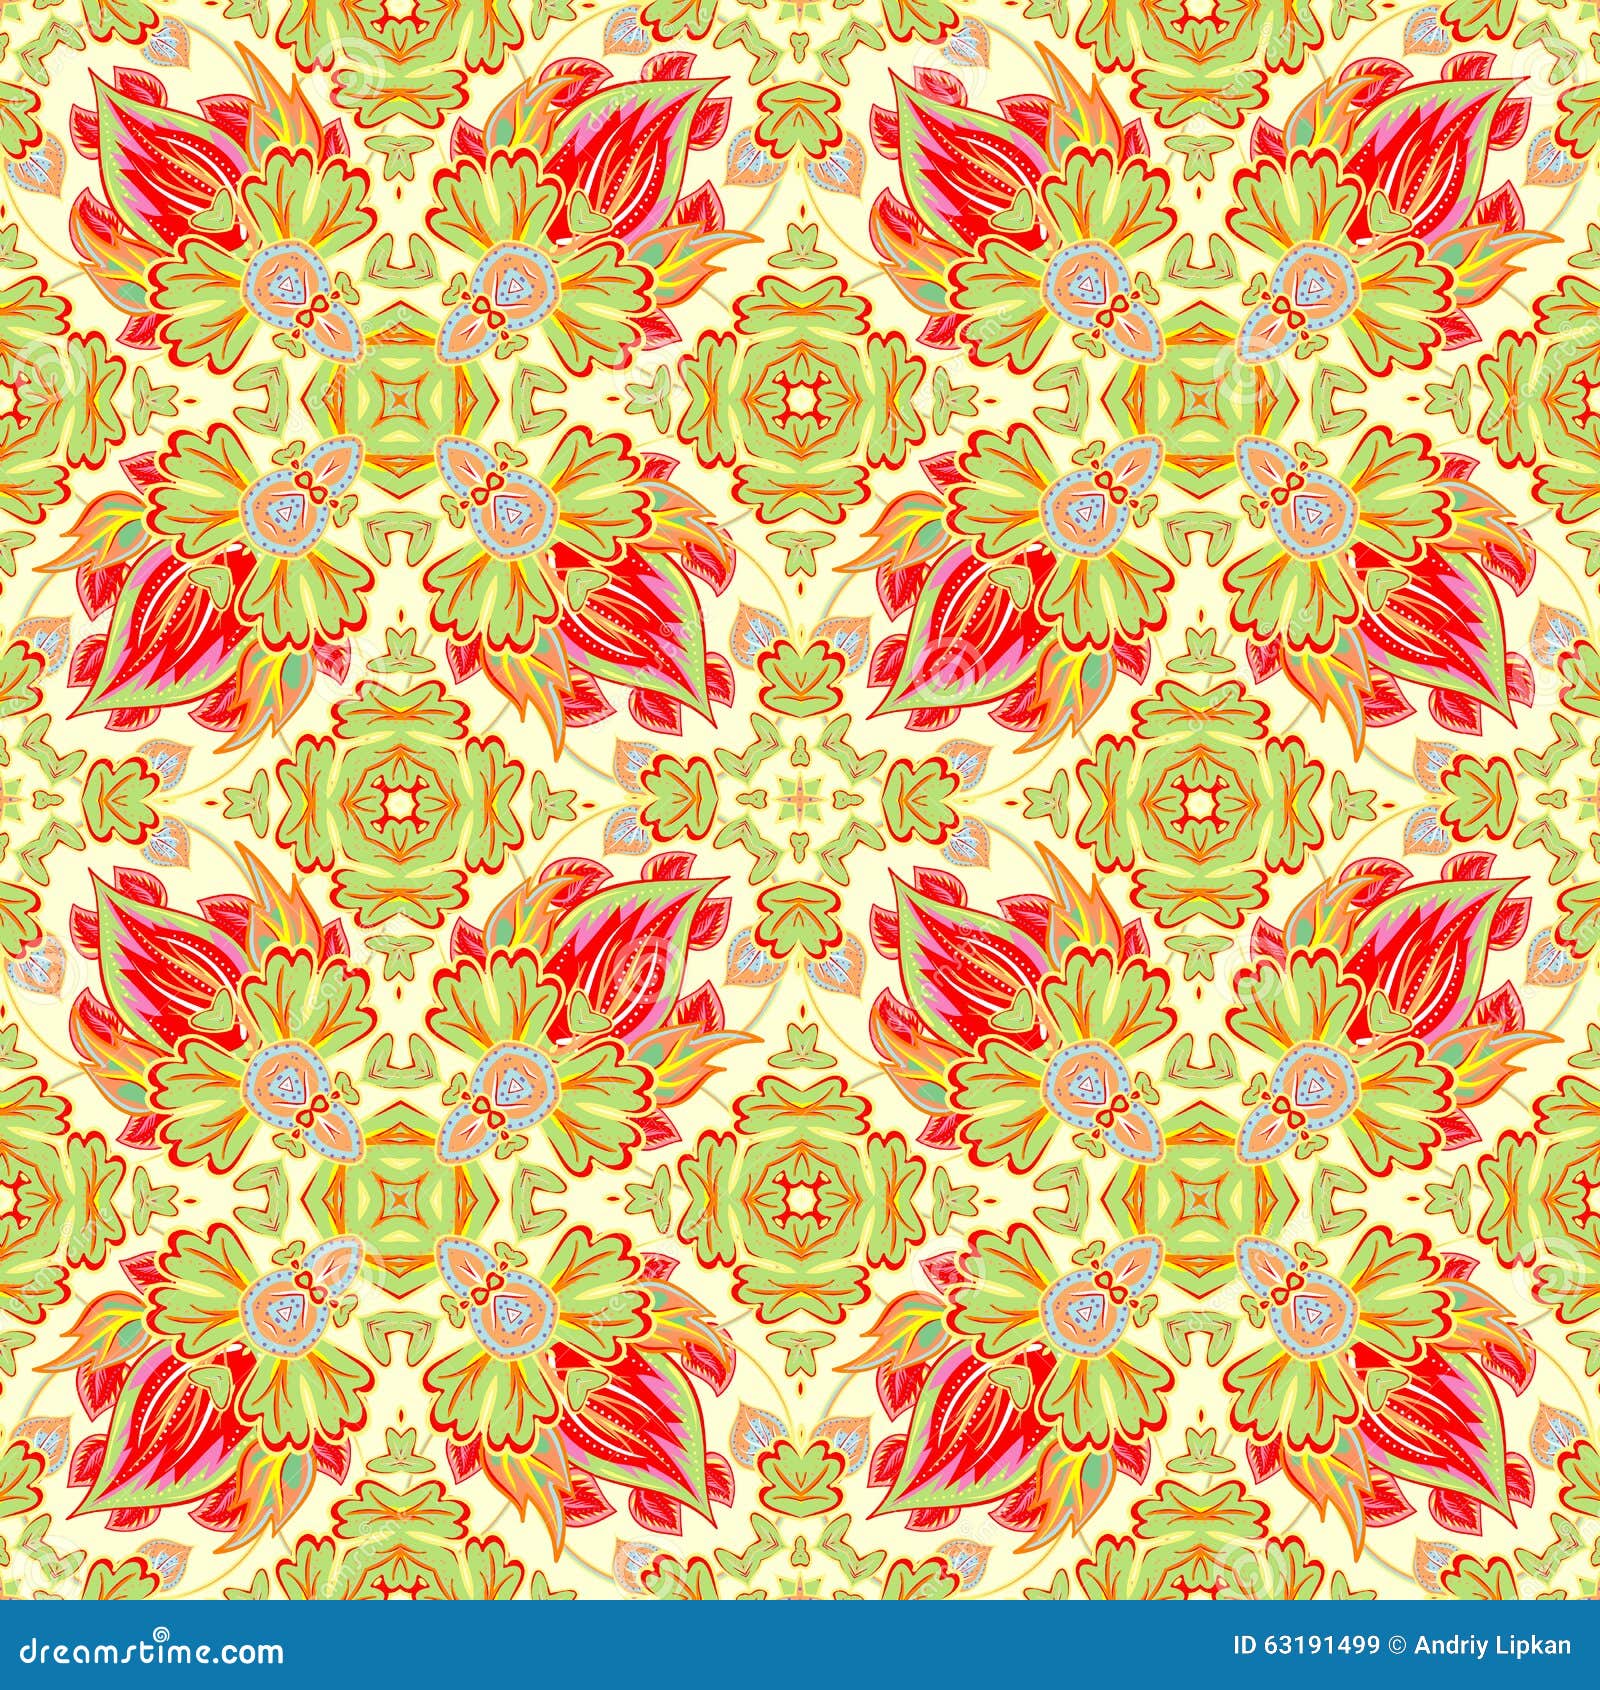 Luxury Damask Seamless Tiled Motif  Vector Pattern  For 